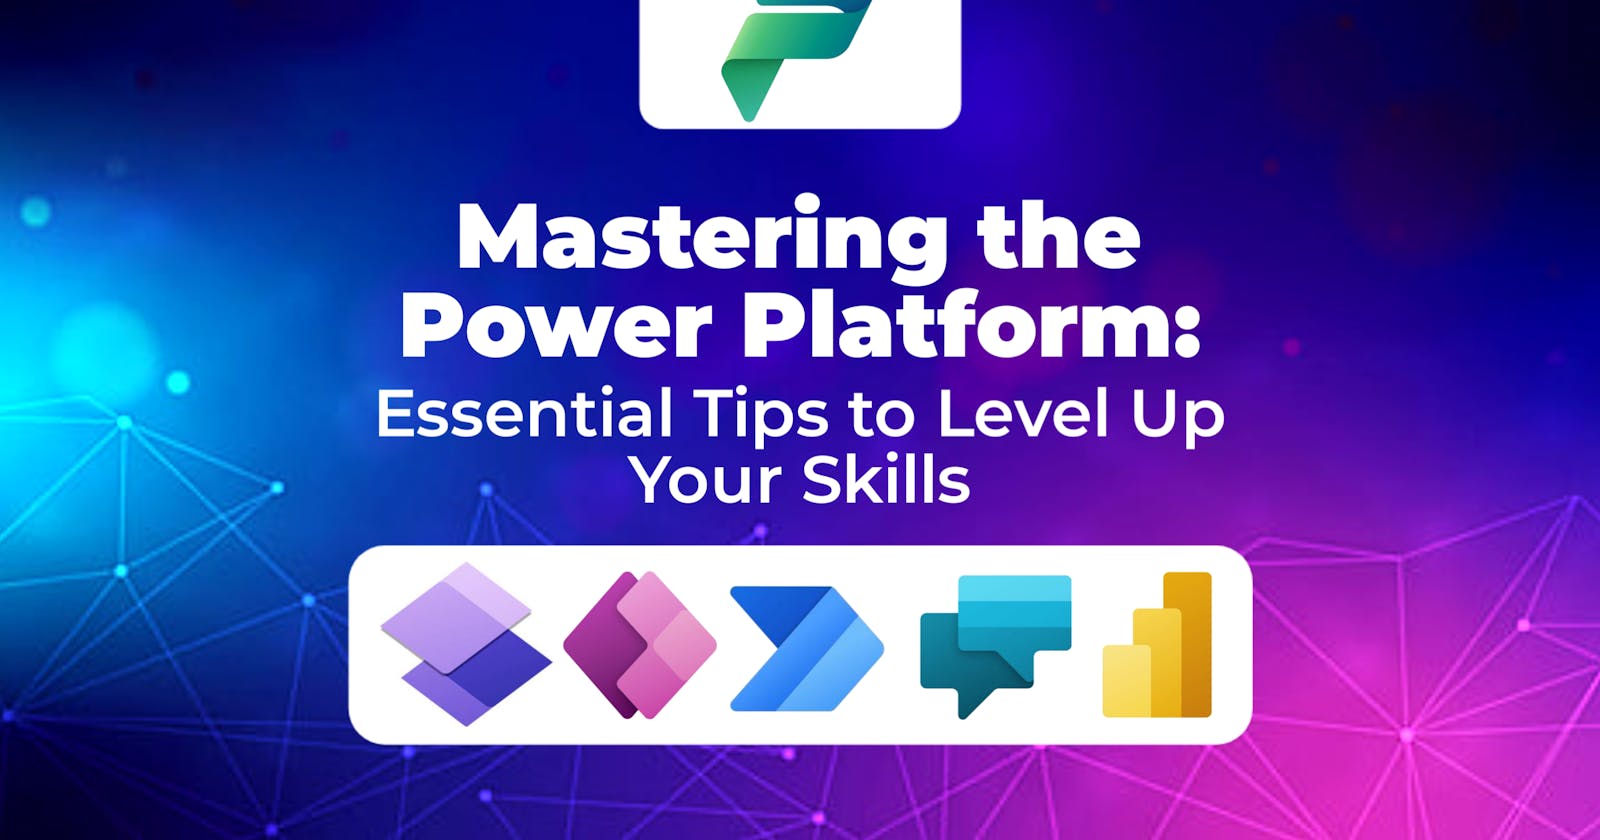 Mastering the Power Platform: Essential Tips to Level Up Your Skills